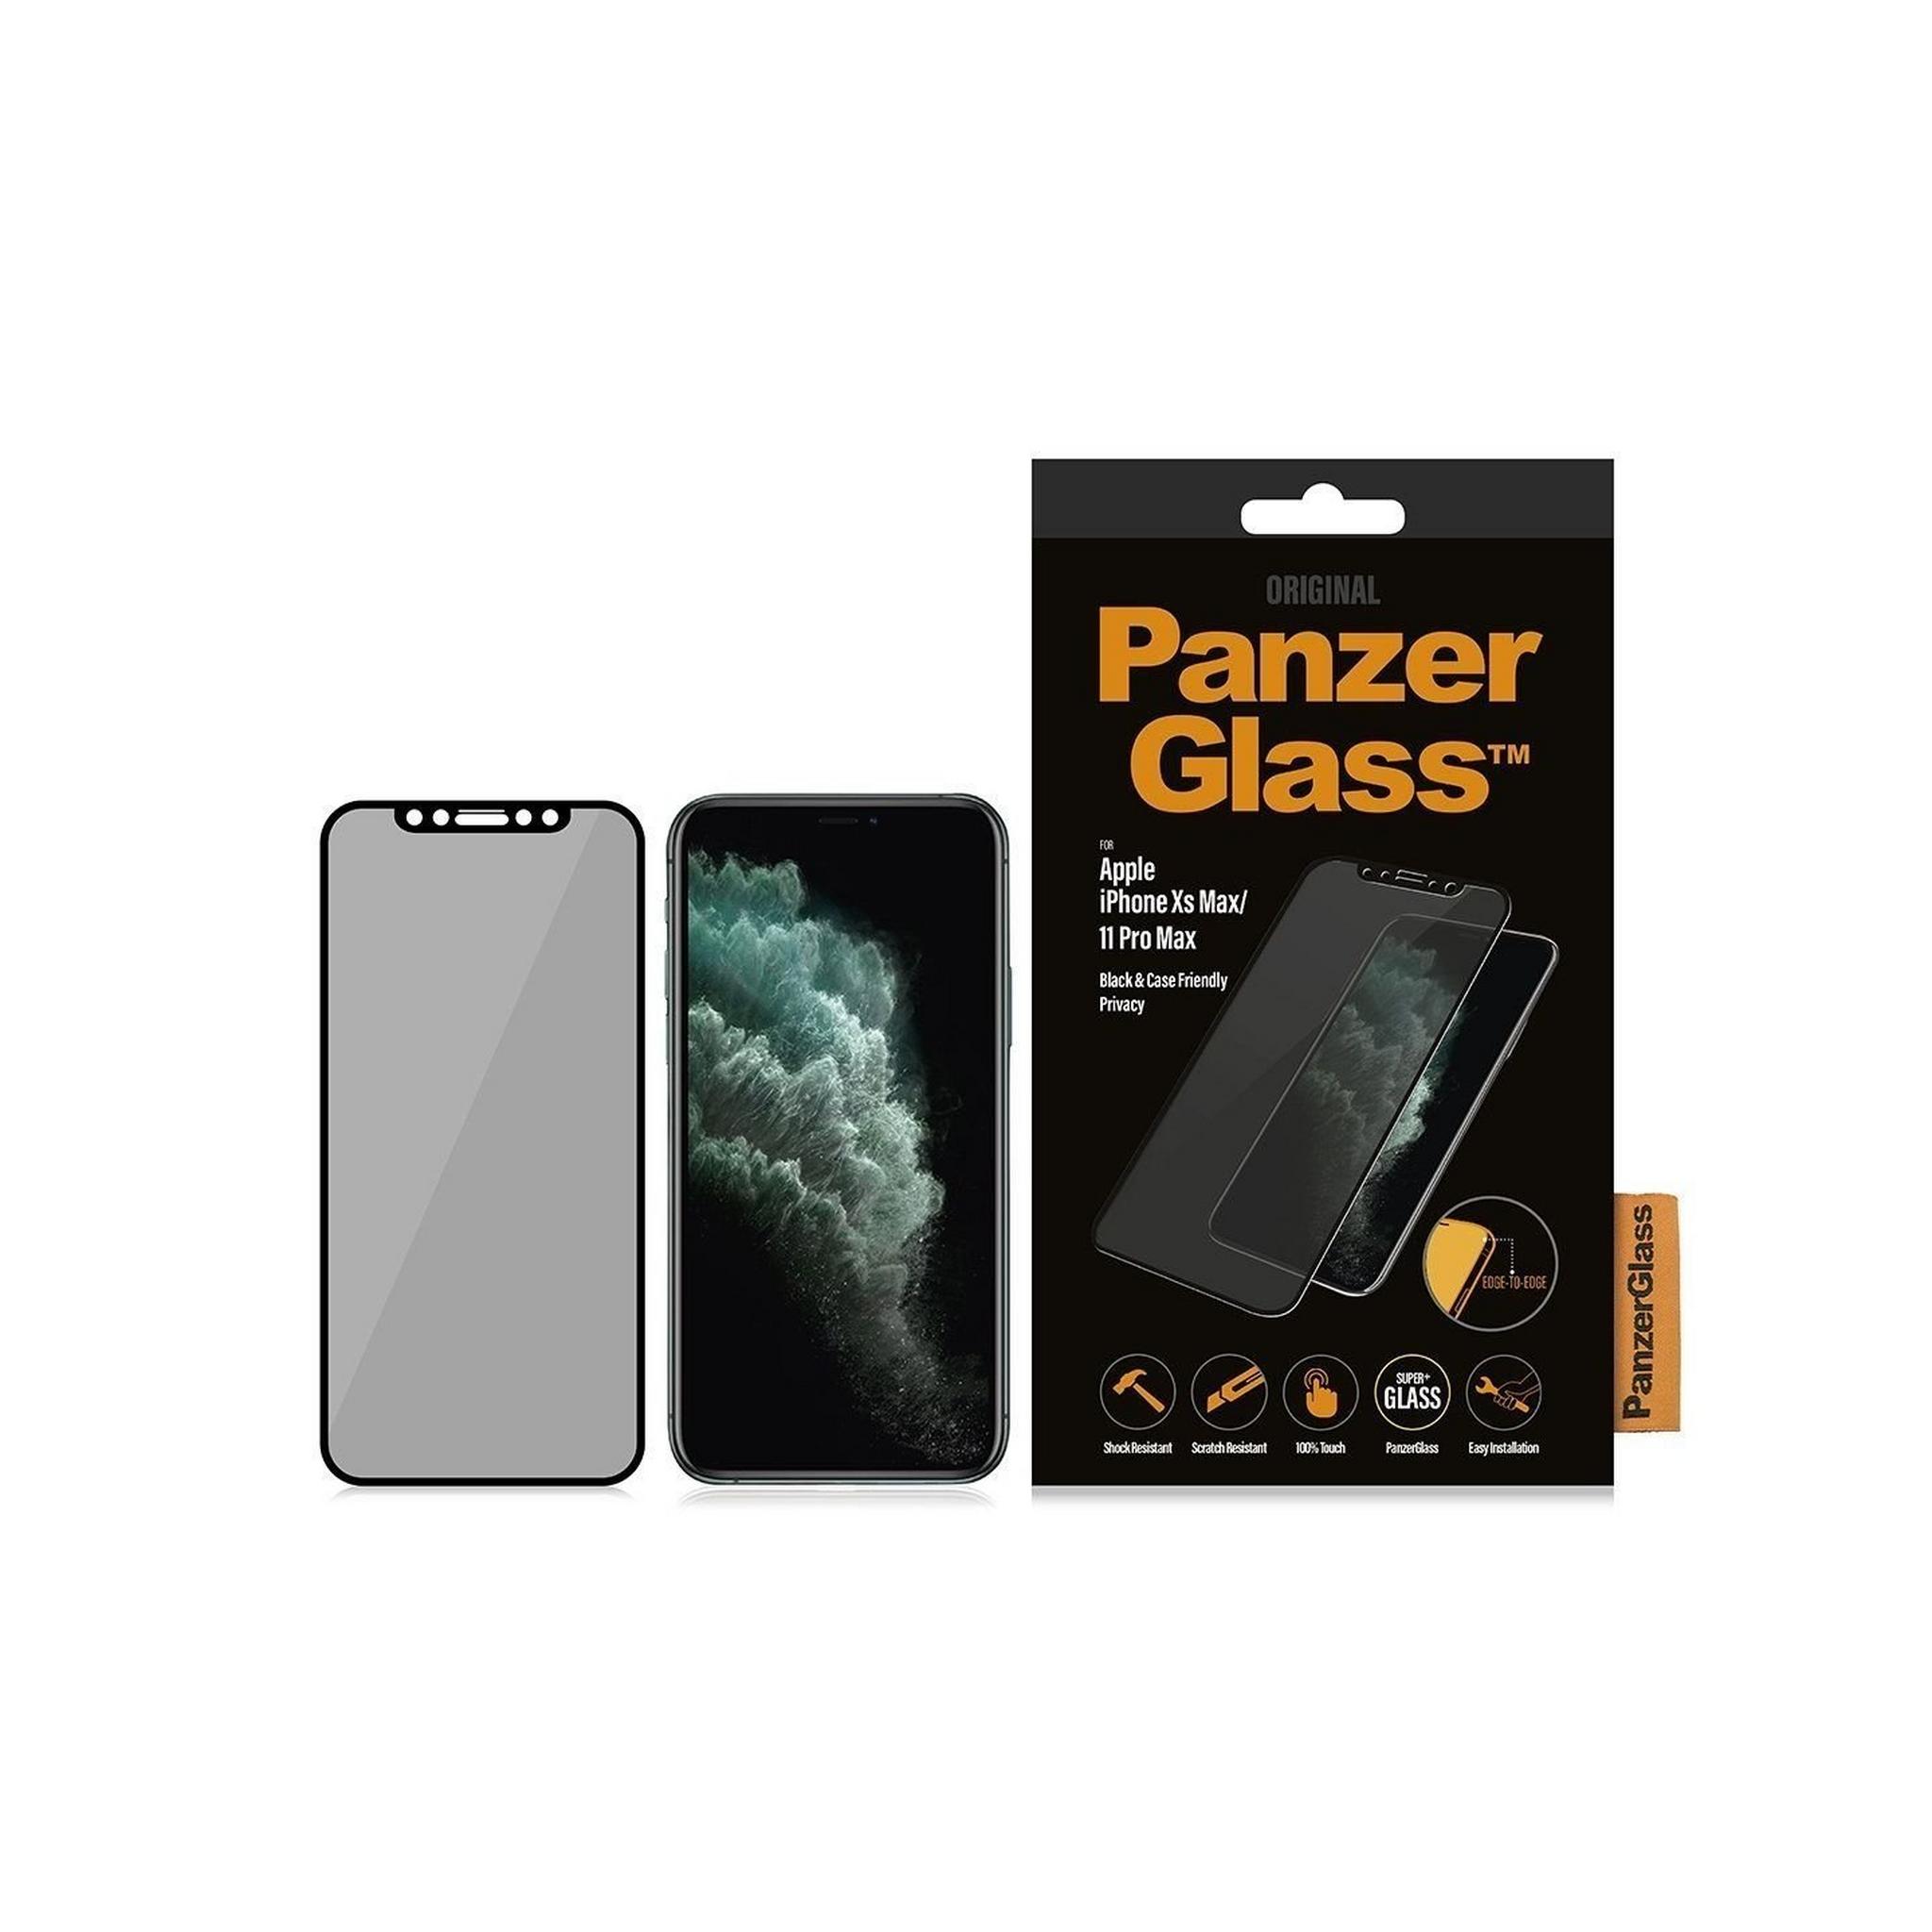 Panzer Glass iPhone 11 Pro Max Case Friendly Privacy Screen Protector (P2666) - Black